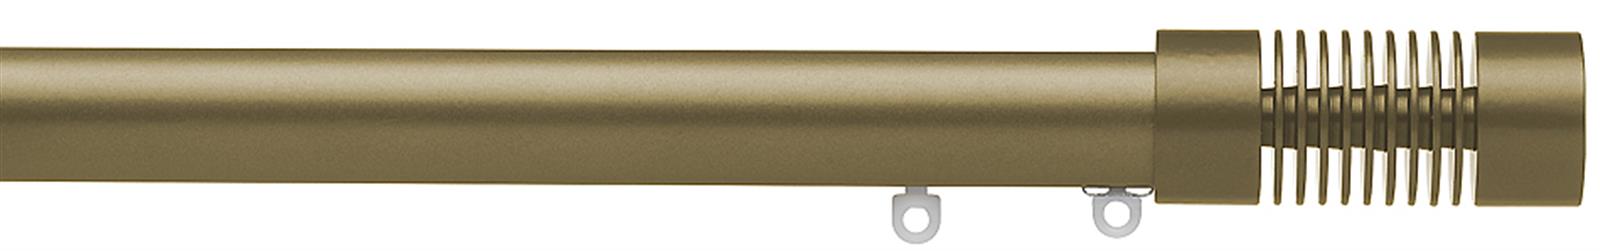 Silent Gliss Metropole 30mm 7610 Sand Groove Cylinder Finial